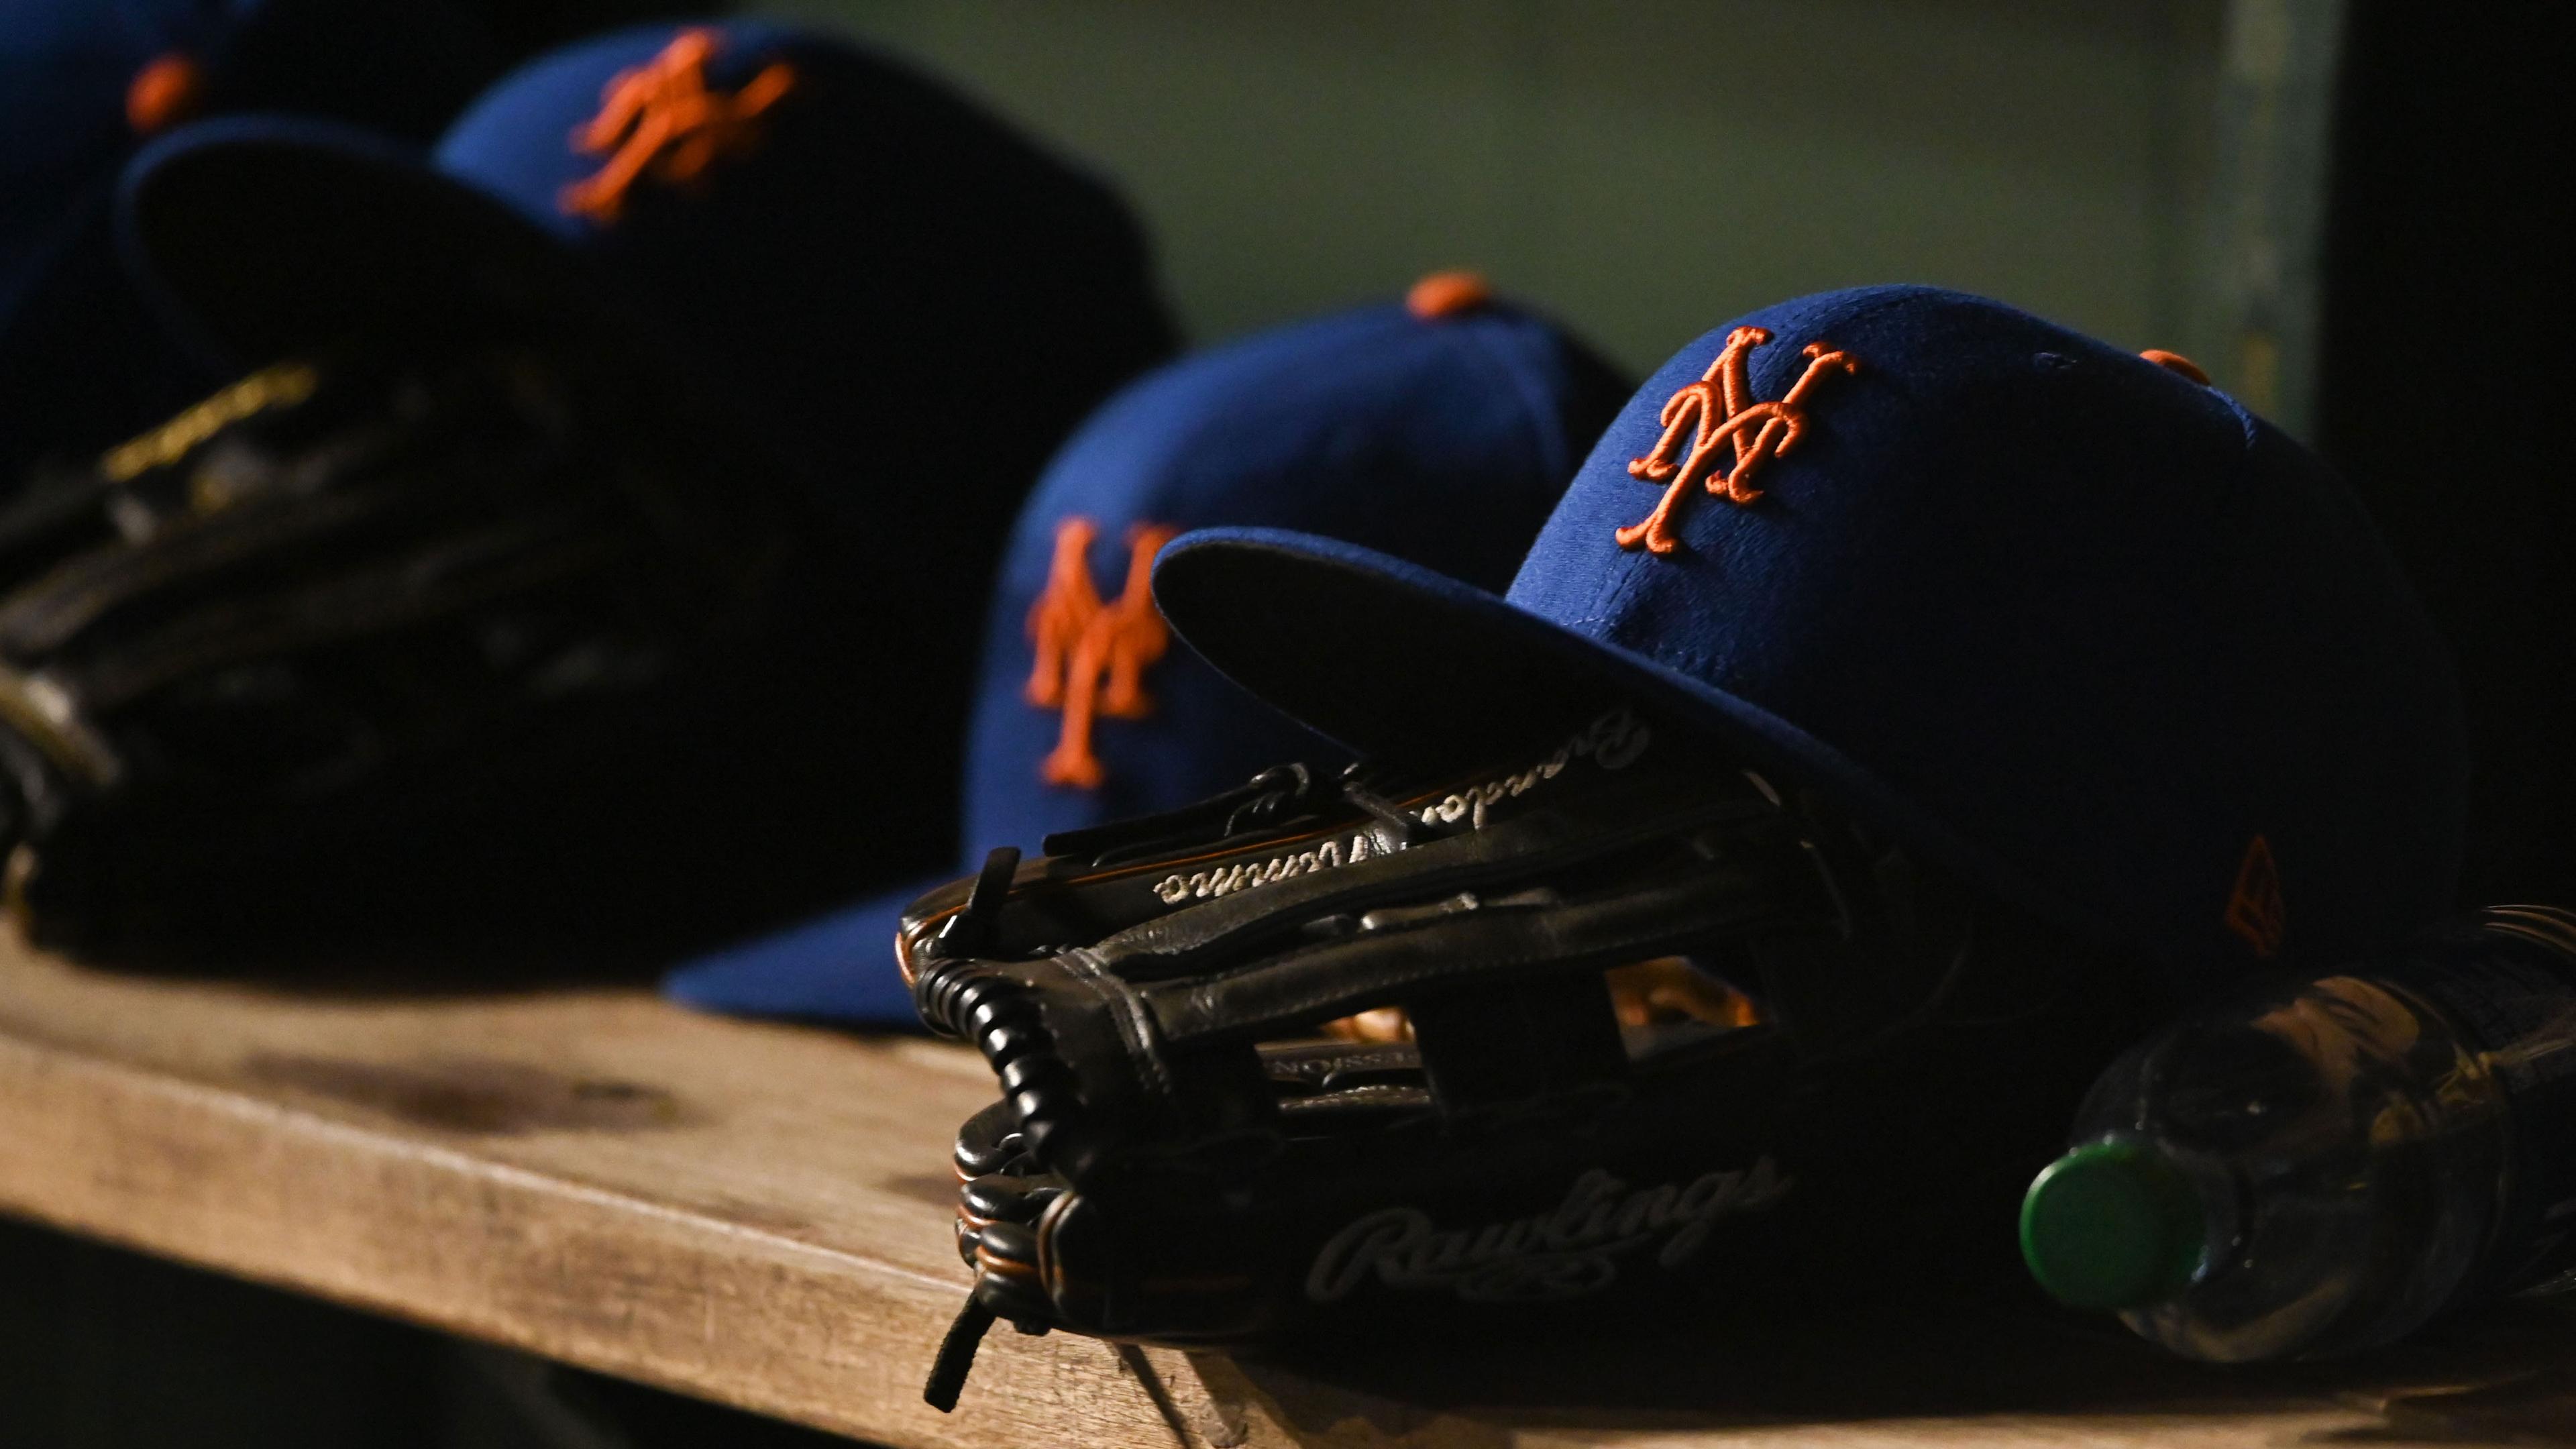 Apr 8, 2022; Washington, District of Columbia, USA; A detail view of New York Mets hats and gloves during the game between the Washington Nationals and the New York Mets at Nationals Park. / Tommy Gilligan-USA TODAY Sports